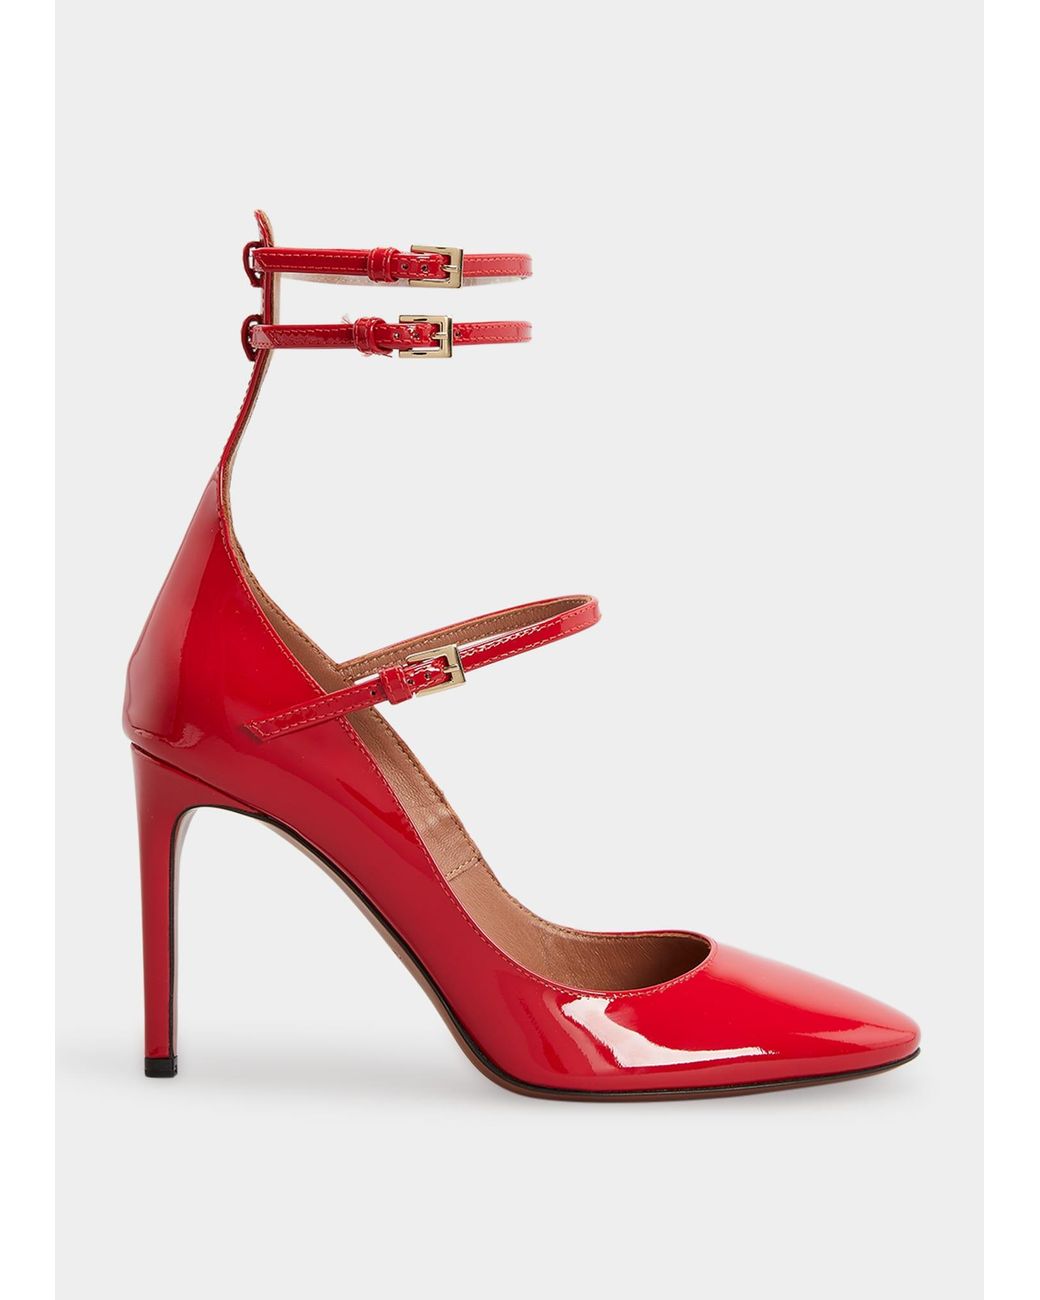 Alaïa Patent Mary Jane Ankle-strap Pumps in Red | Lyst